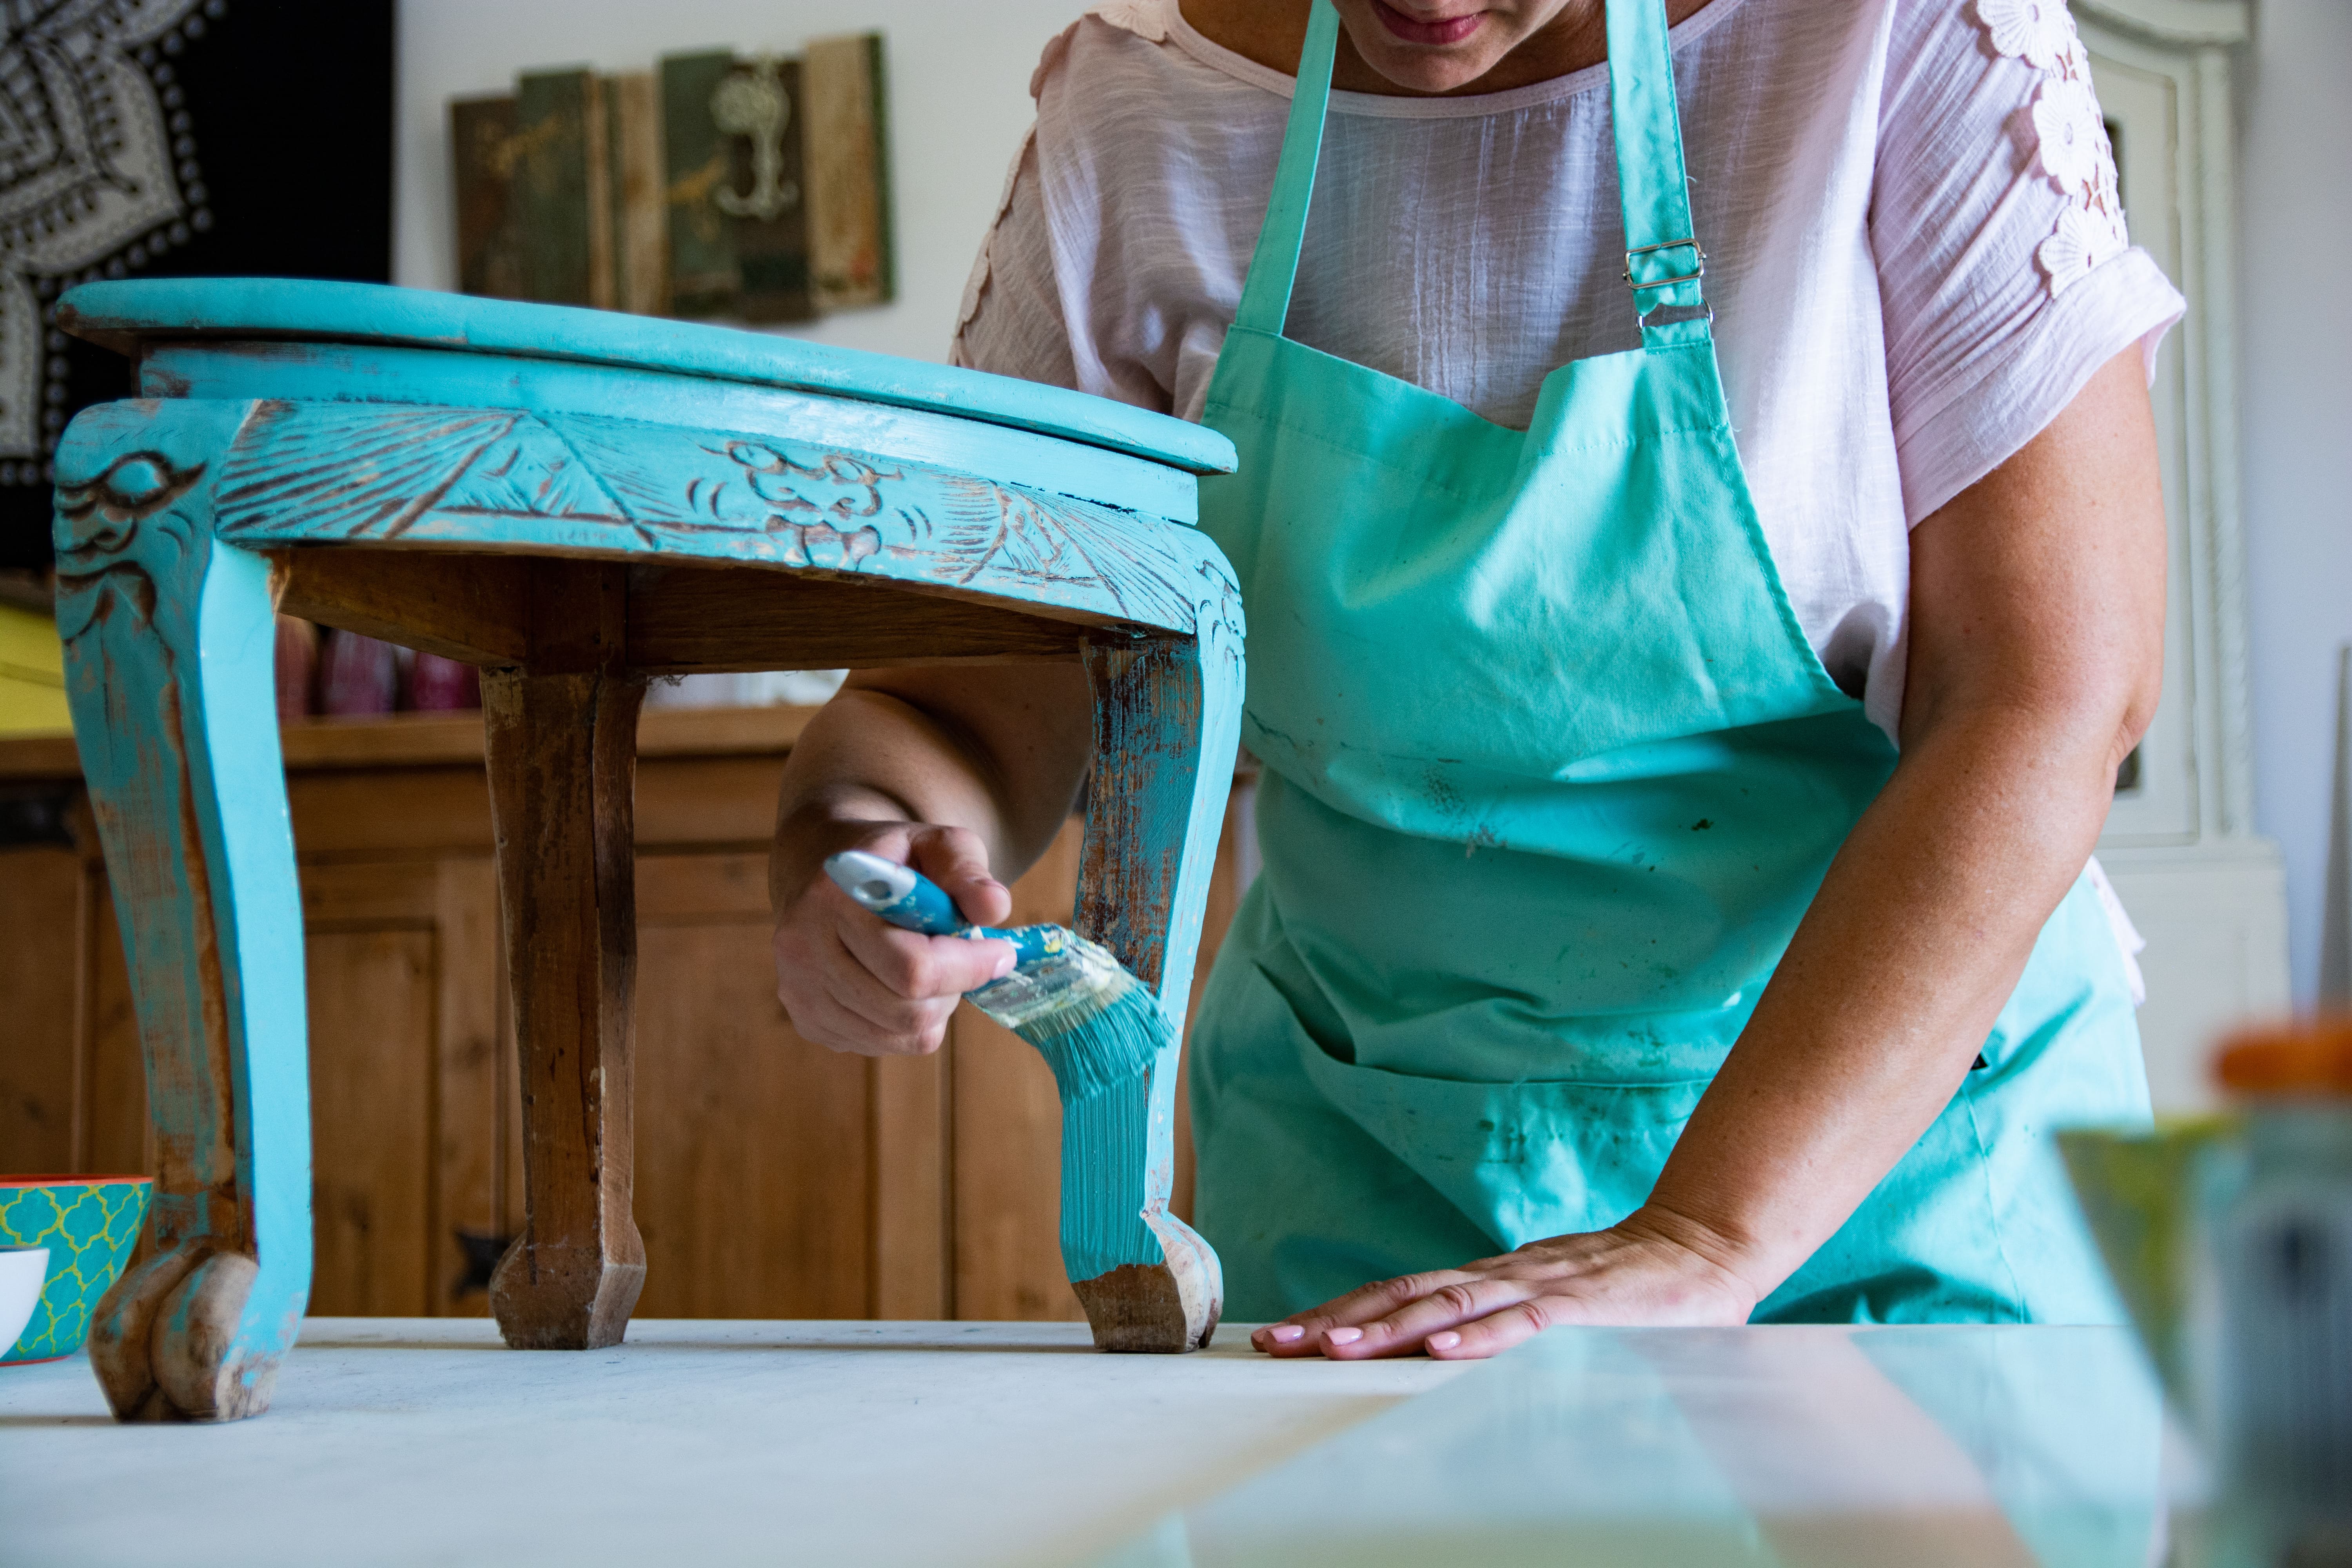 A lady upcycling a decorative wooden stool by painting it teal